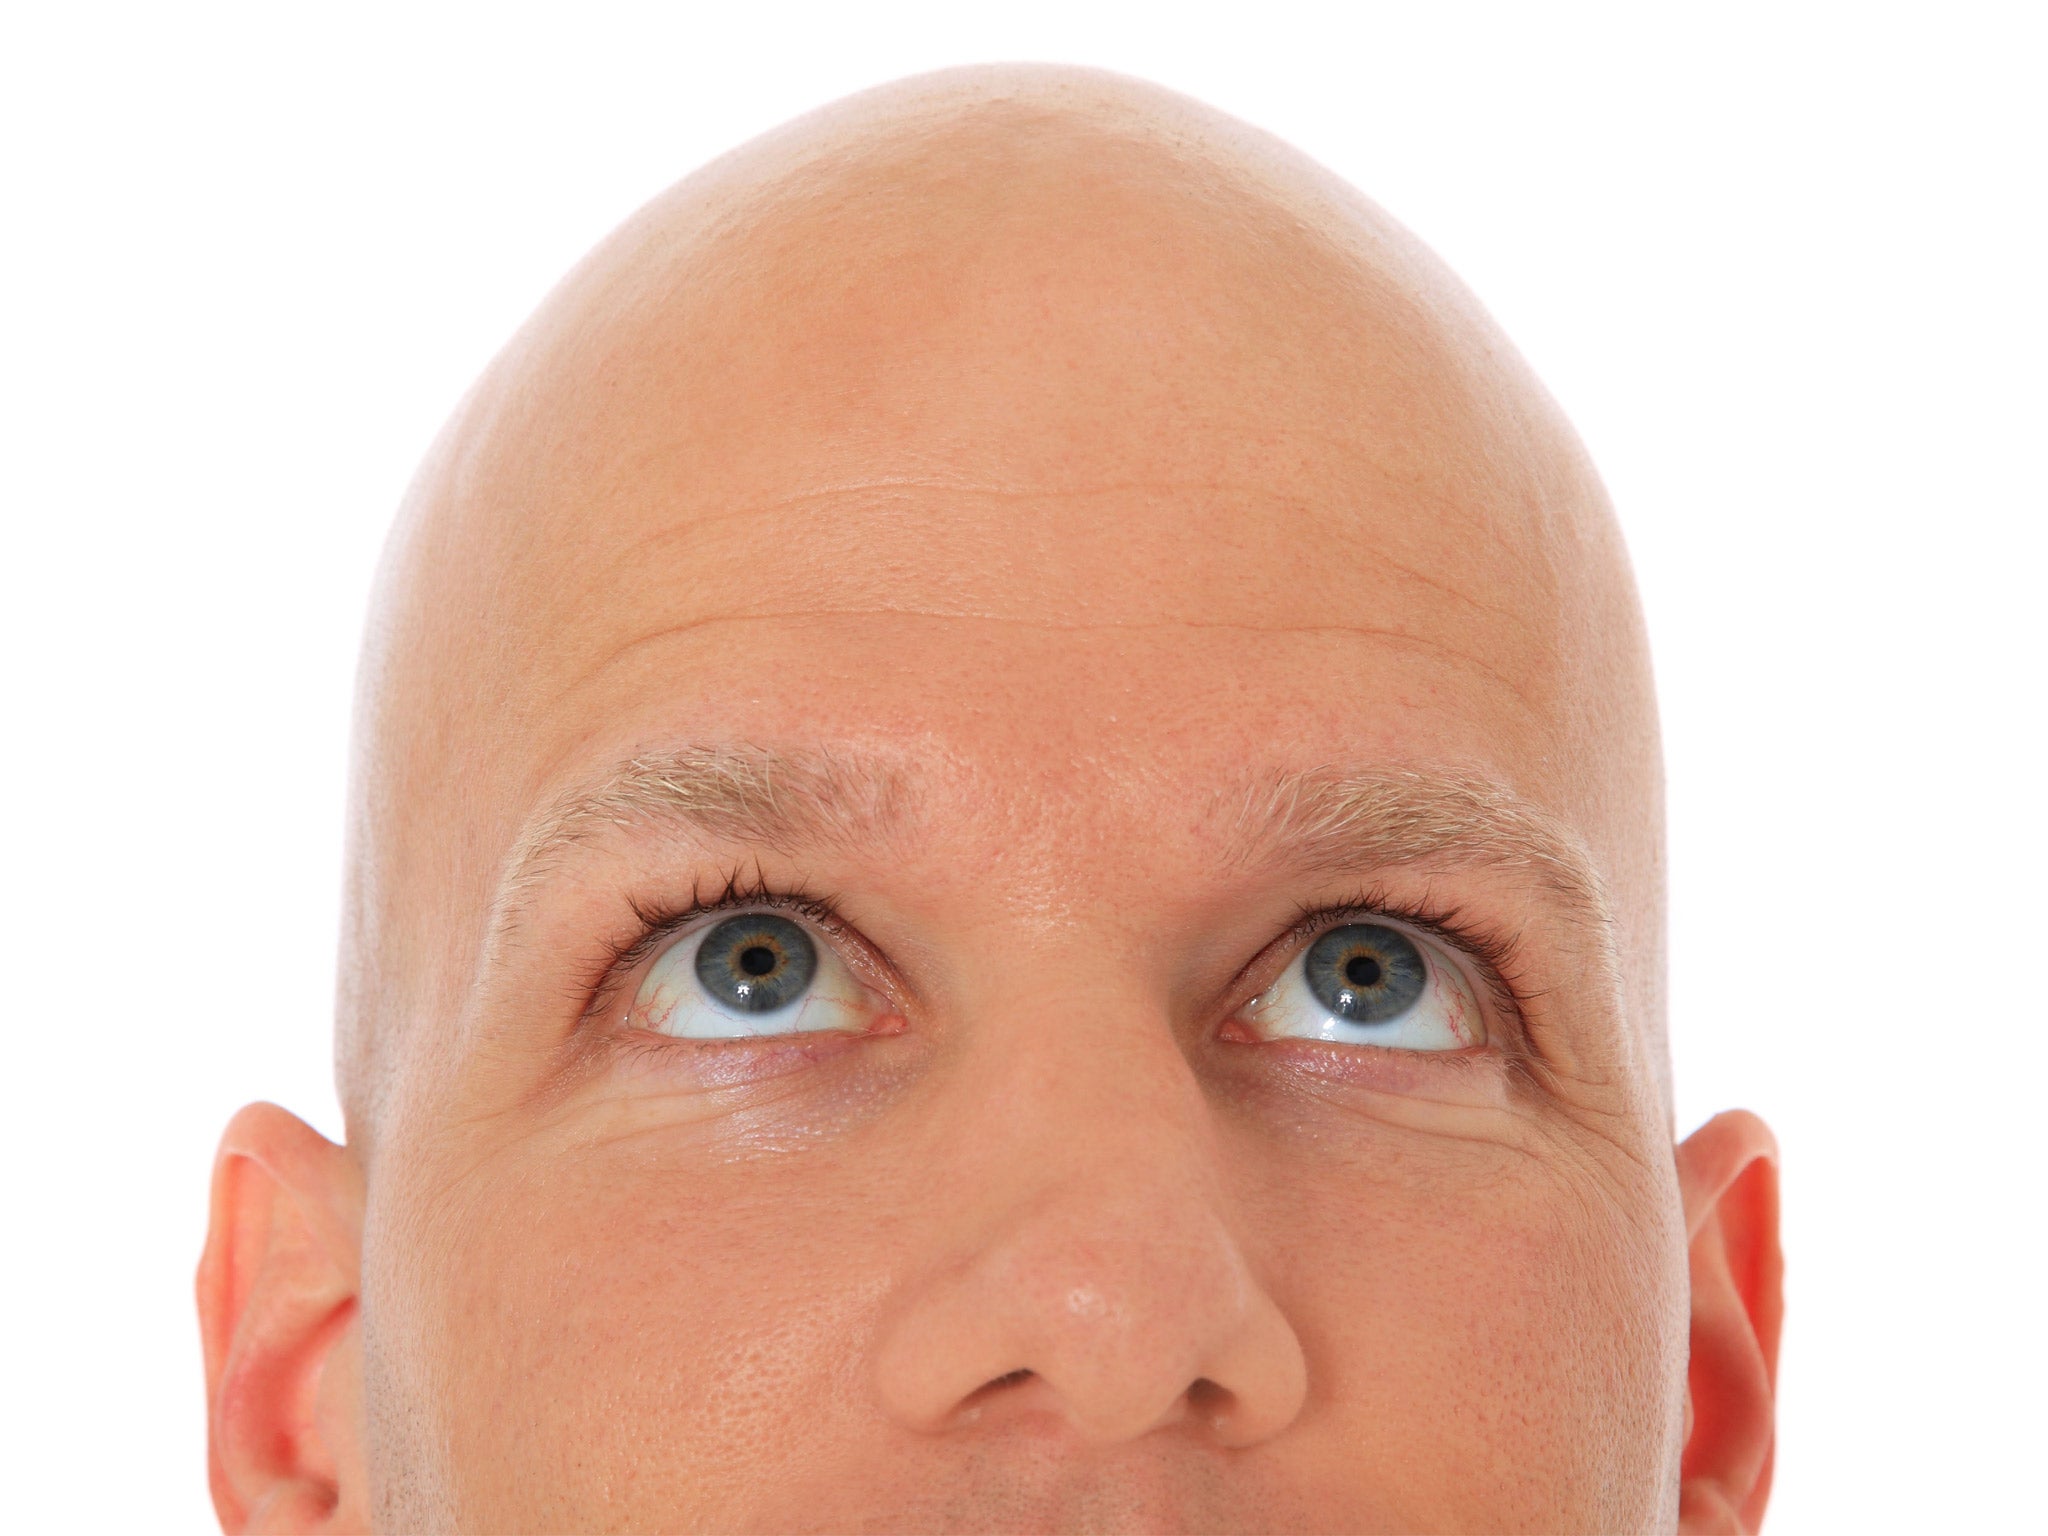 The bald facts: hair loss could be the first sign you have heart disease |  The Independent | The Independent